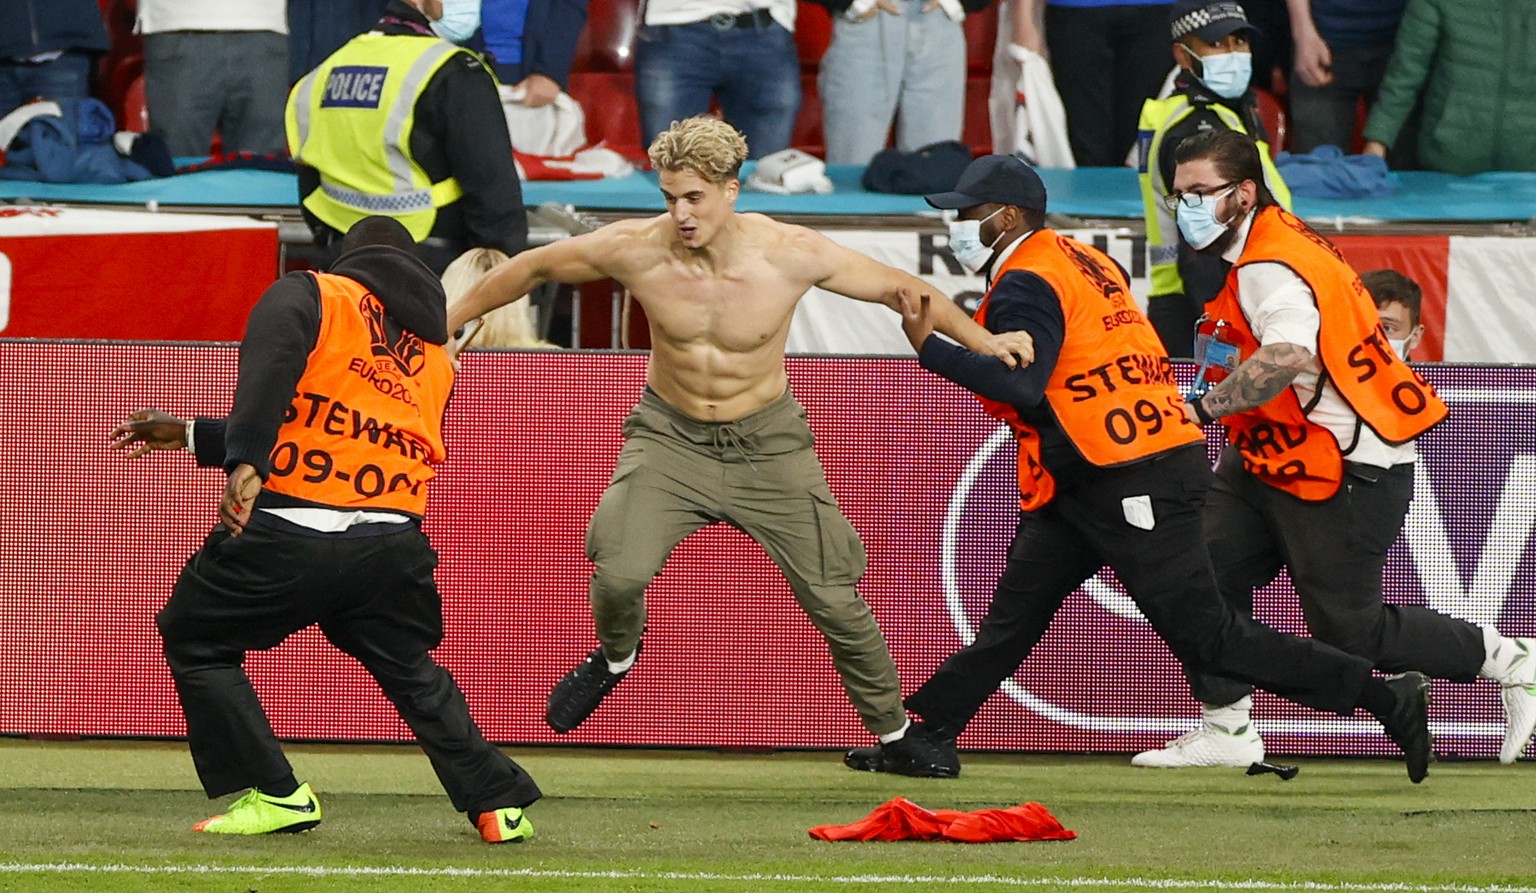 Security tussle with a pitch invader during the Euro 2020 soccer championship final between England and Italy at Wembley stadium in London, Sunday, July 11, 2021. (John Sibley/Pool Photo via AP)